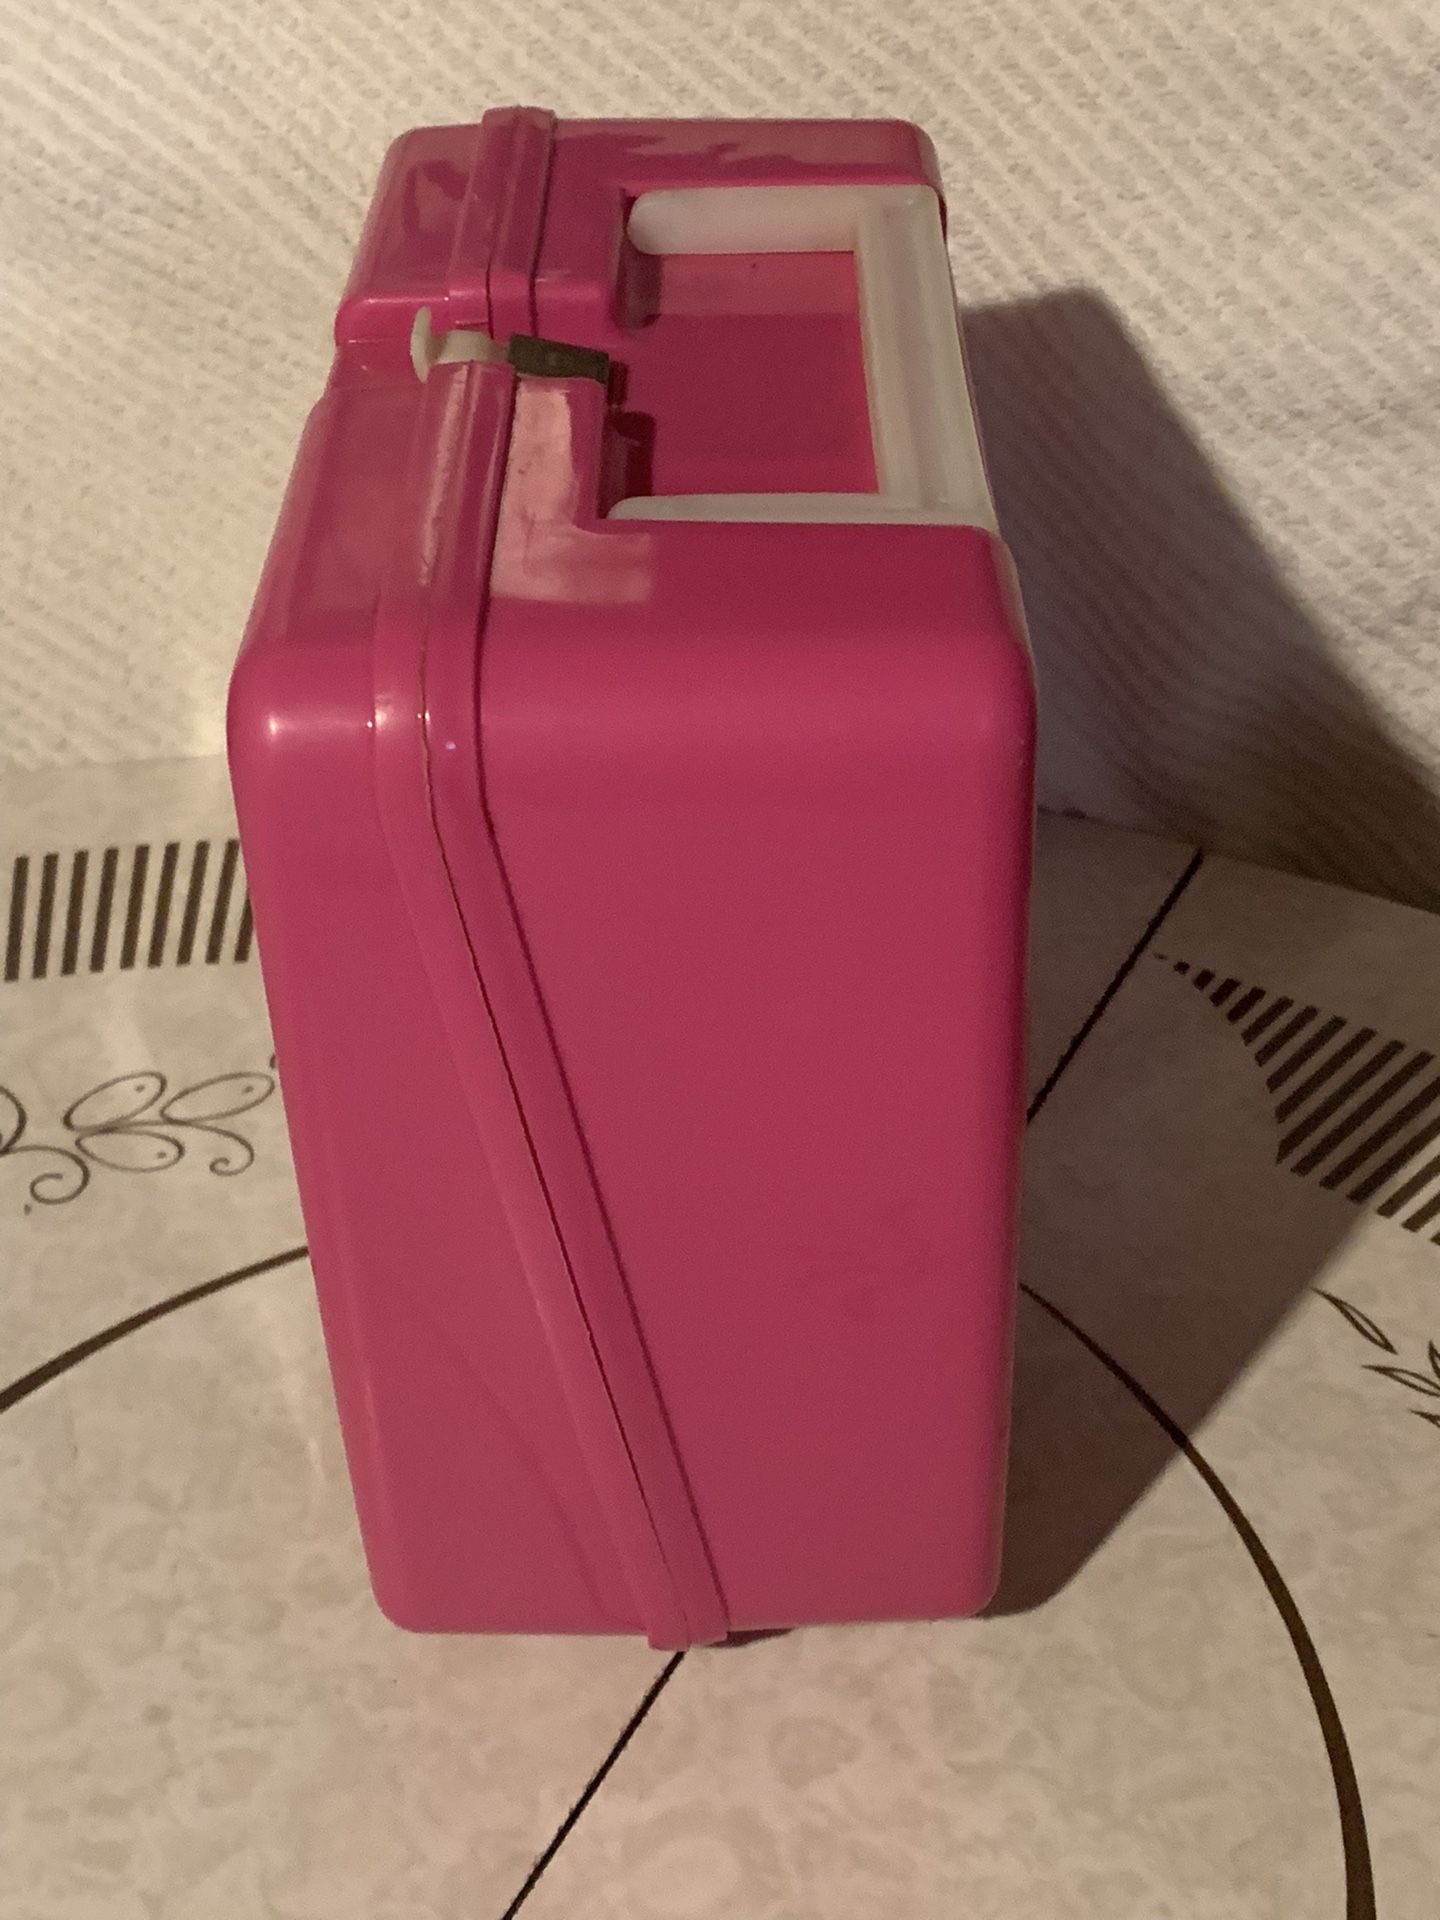 Vintage Barbie Thermos for Sale in Sun City, AZ - OfferUp